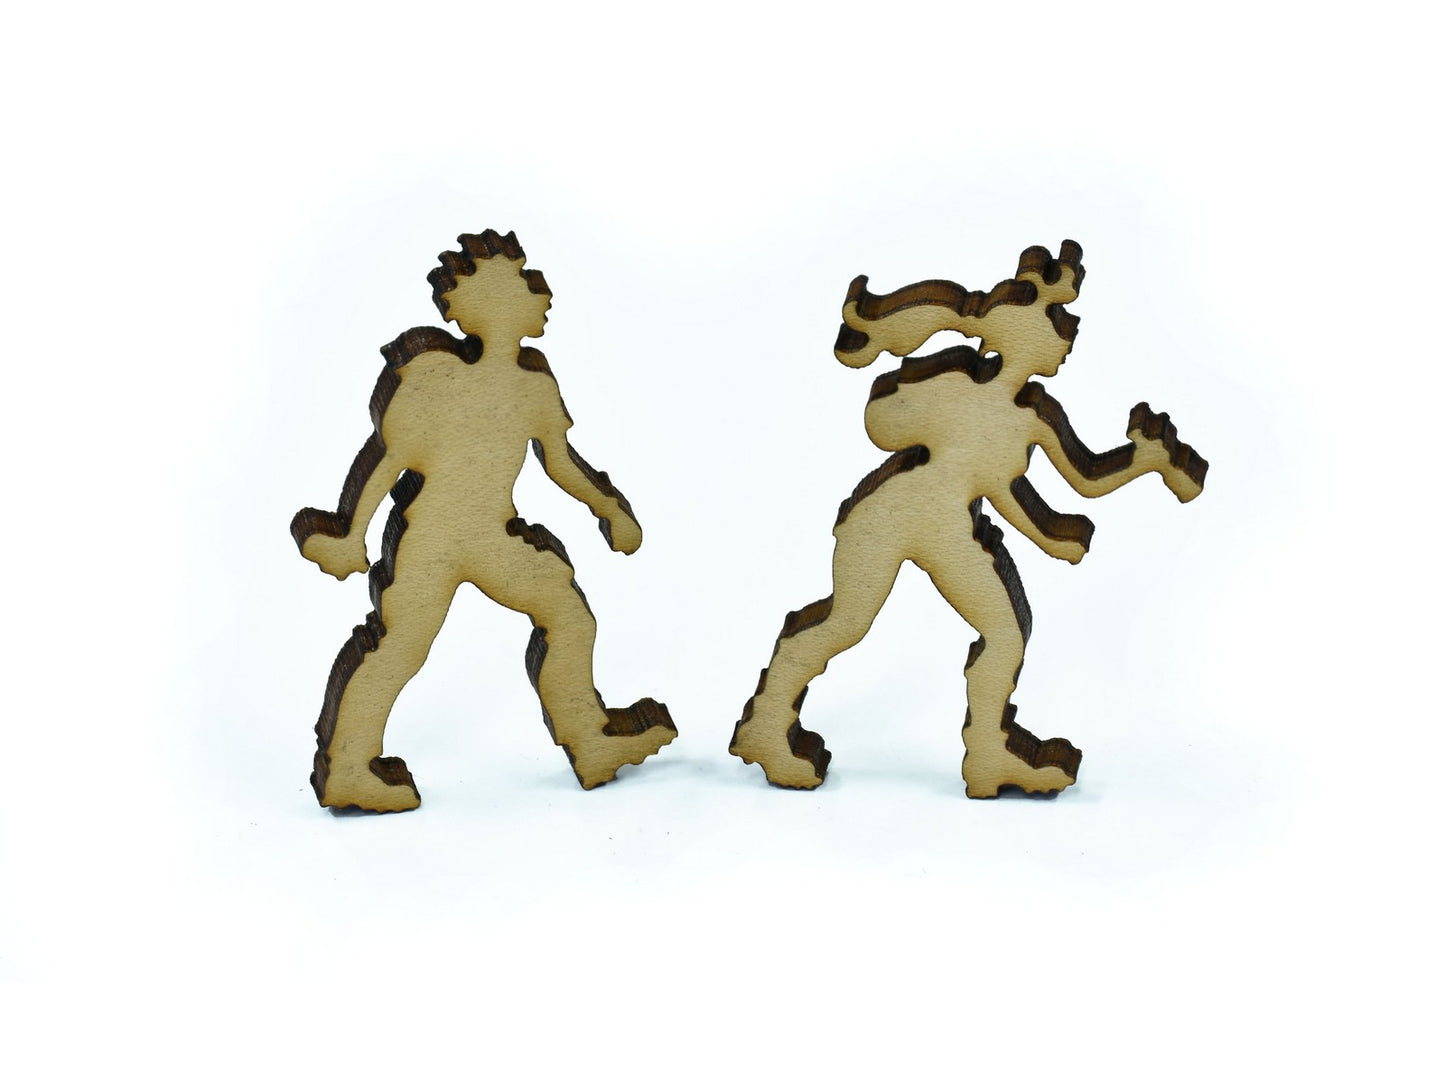 A closeup of pieces in the shape of two hikers.